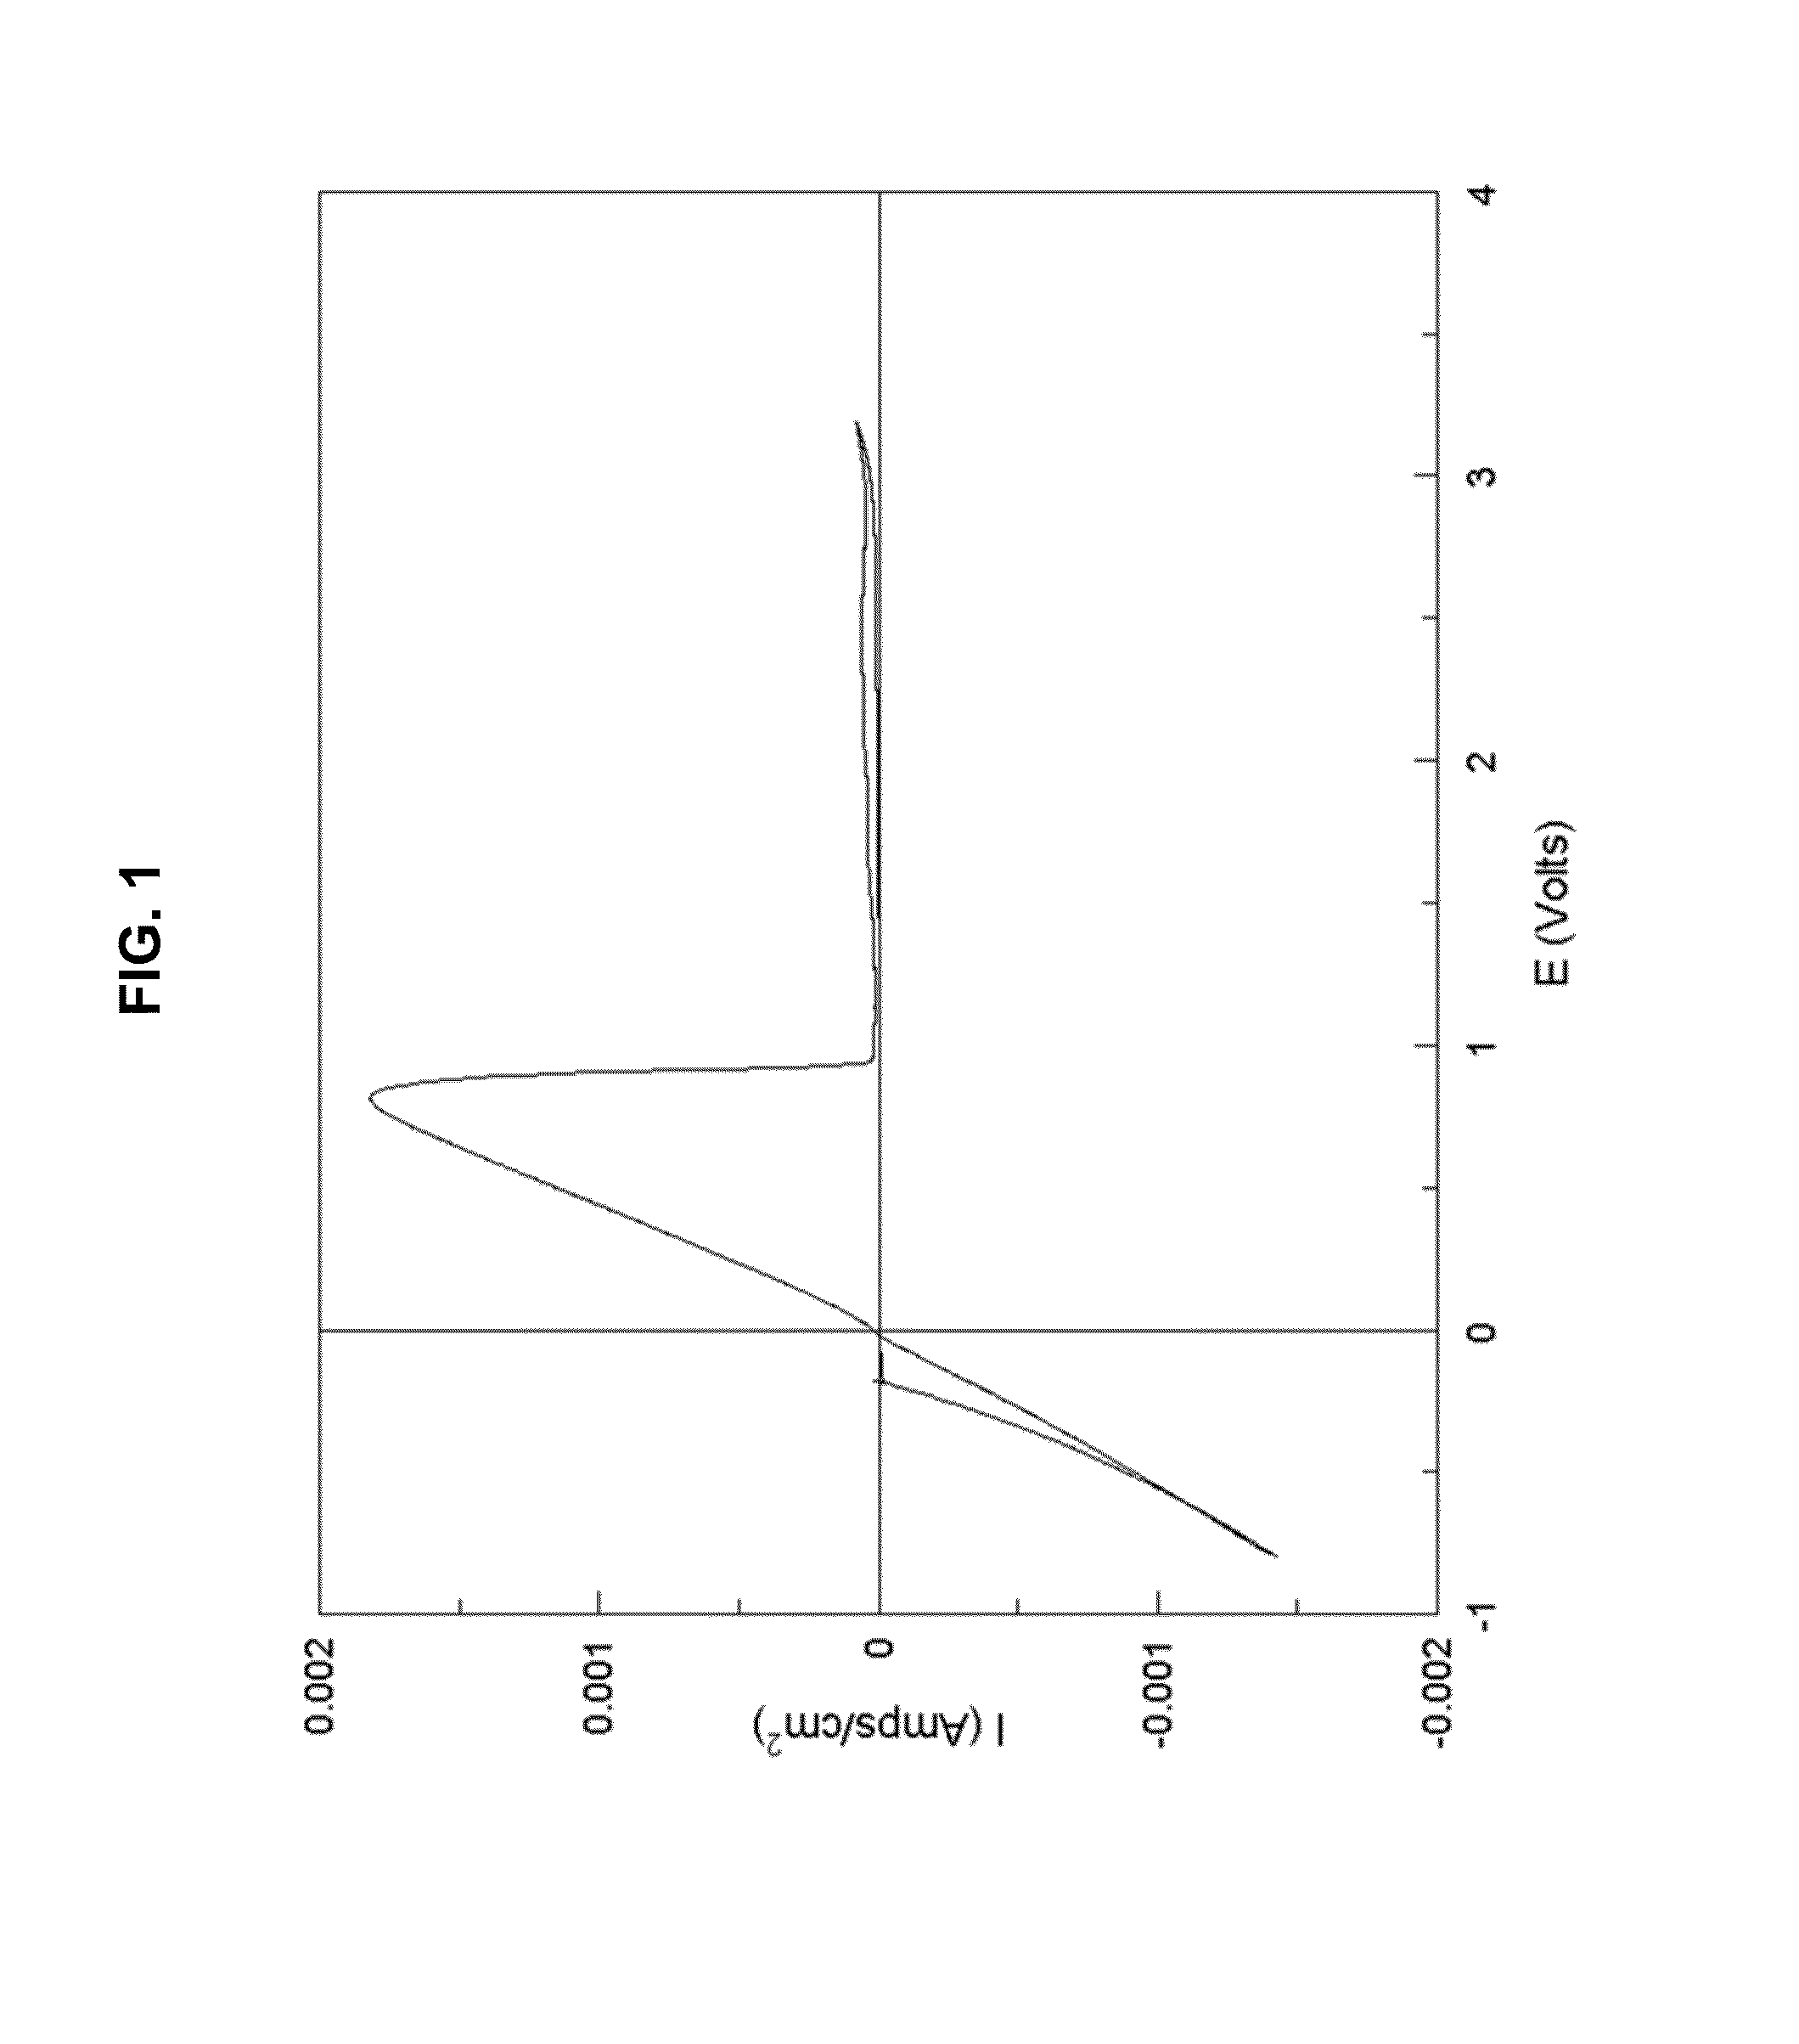 Non-aqueous electrolyte for rechargeable magnesium ion cell